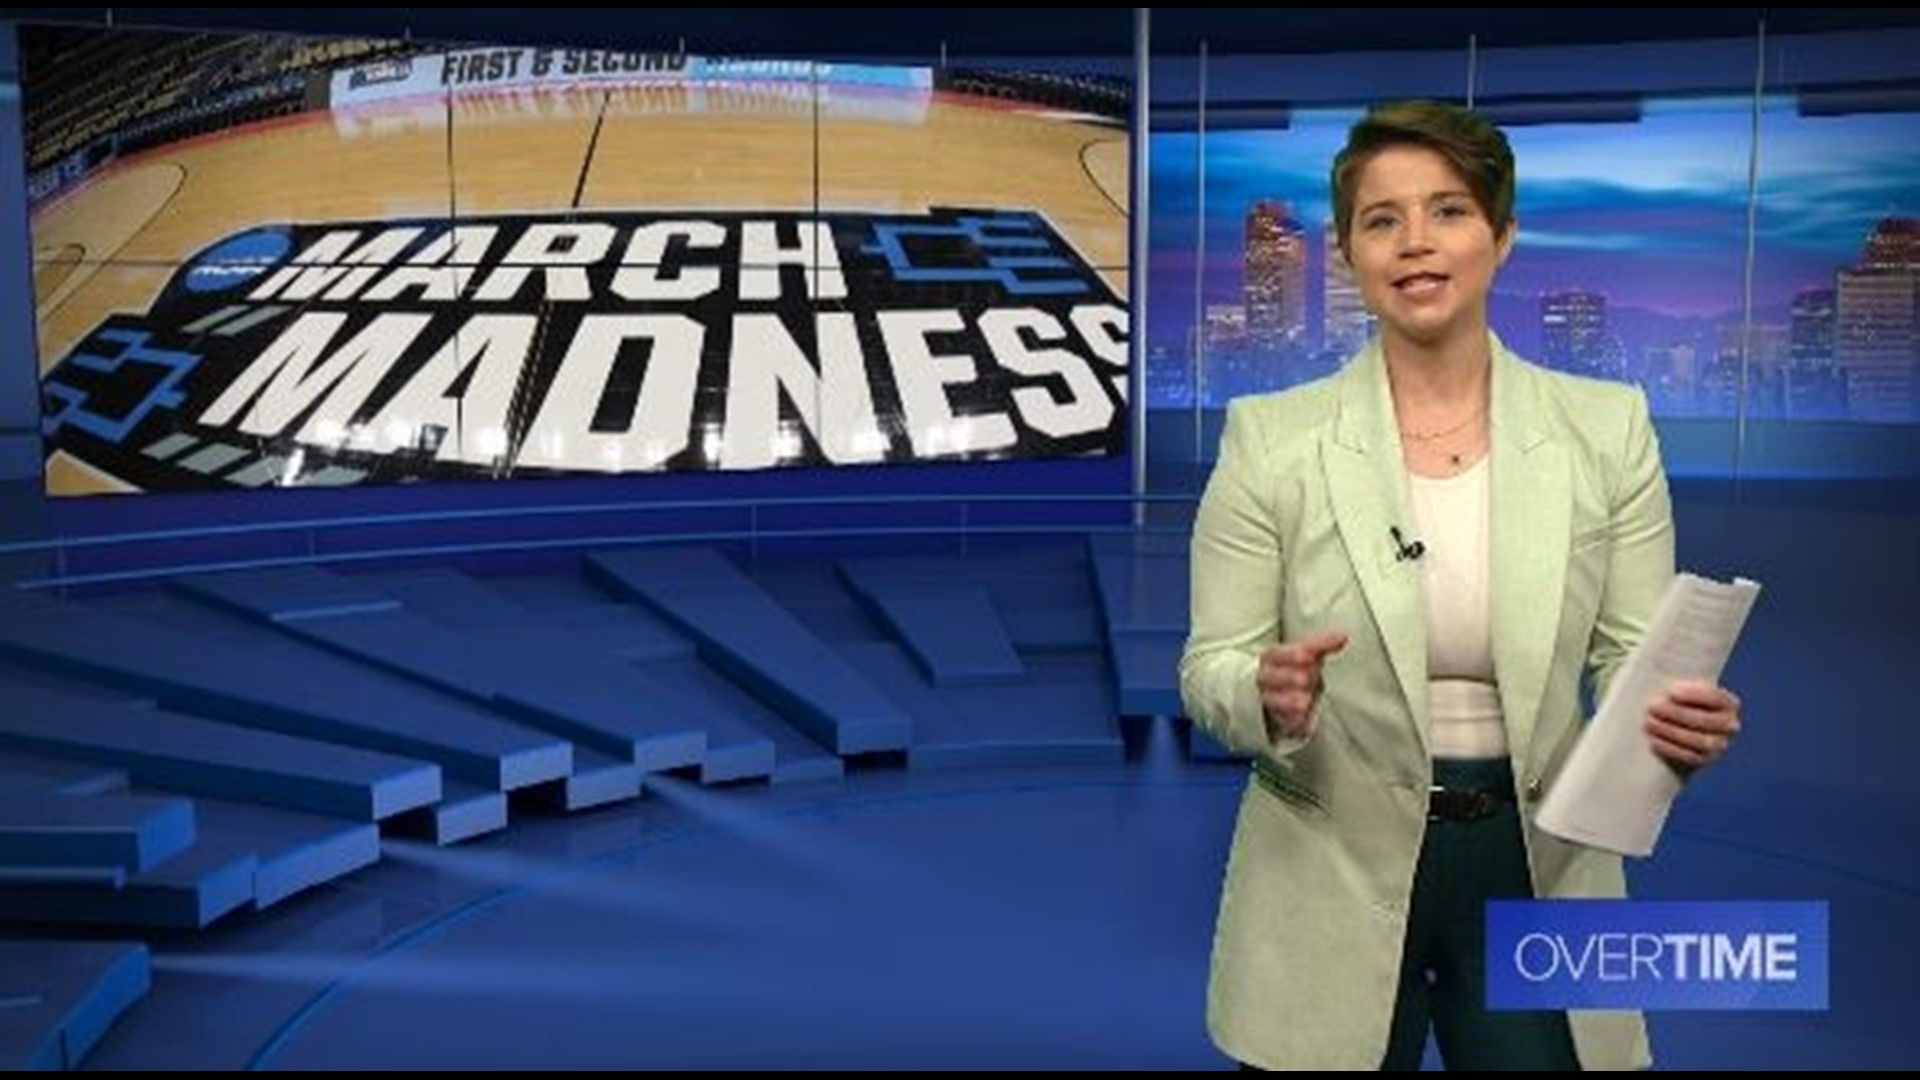 Although the women's basketball tournament is allowed to use March Madness signage for the first time ever, the tournaments are still unbalanced.